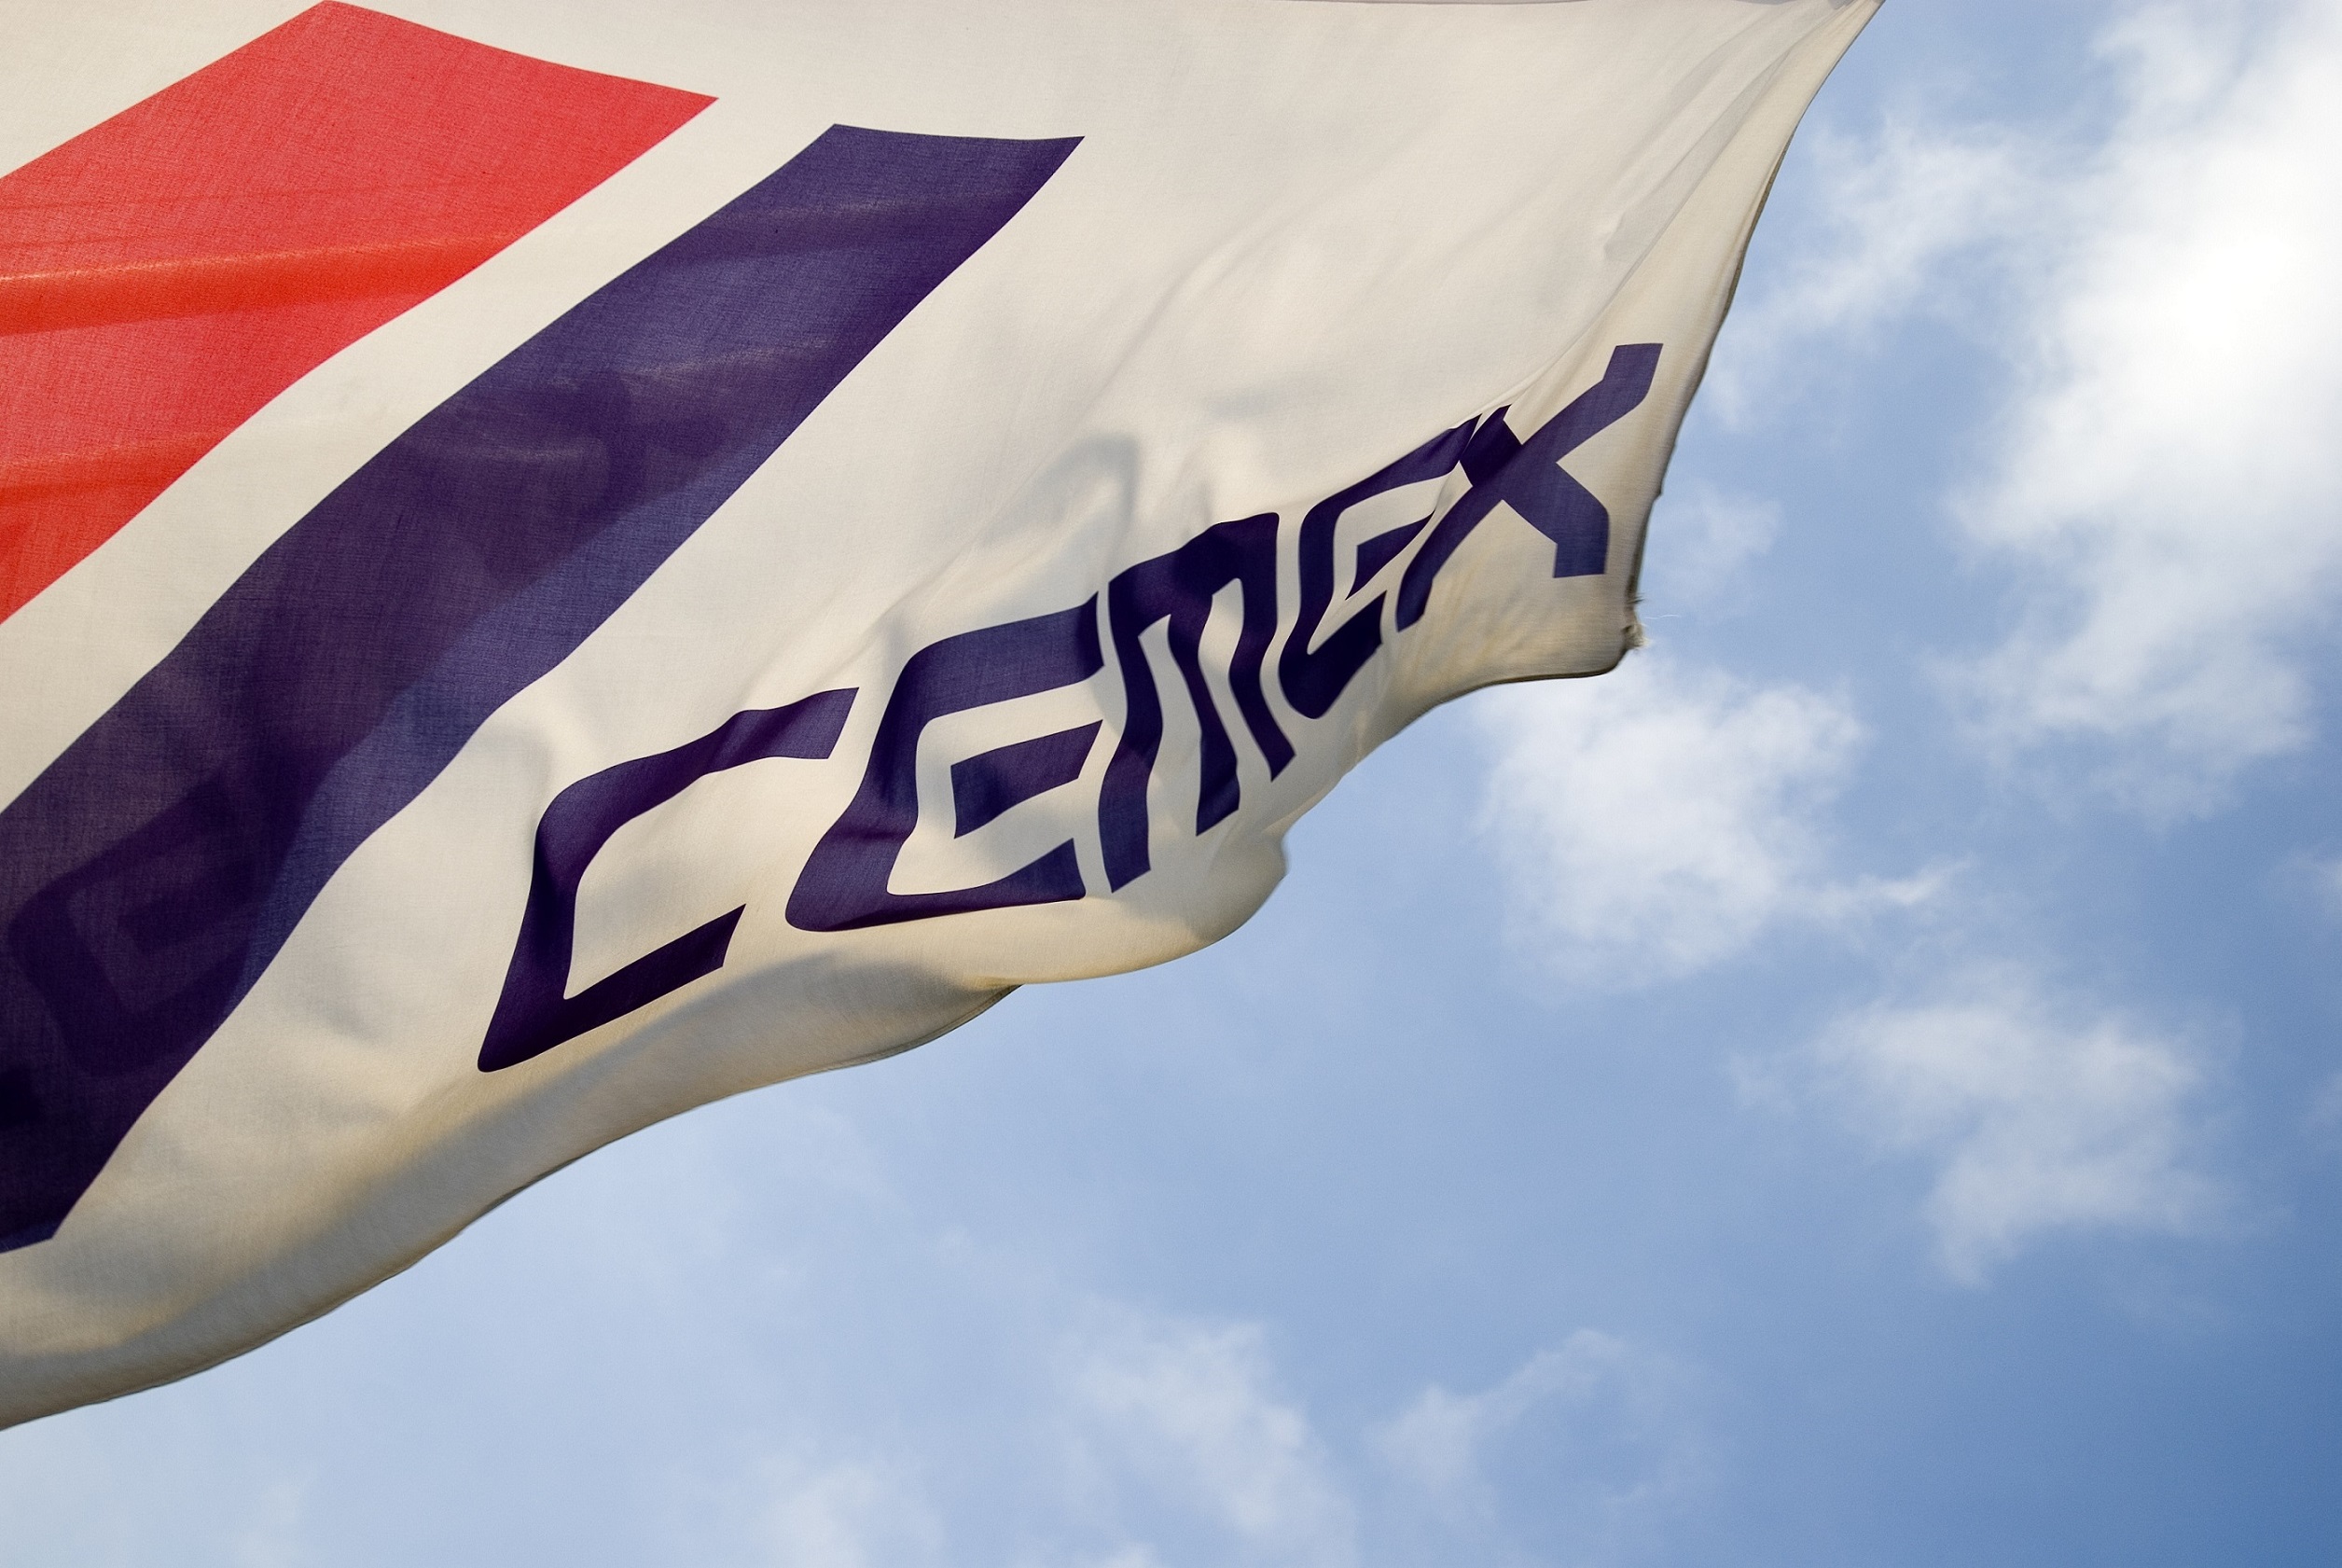 CEMEX says only 10% of the 18 million pallets in the UK construction sector are reused